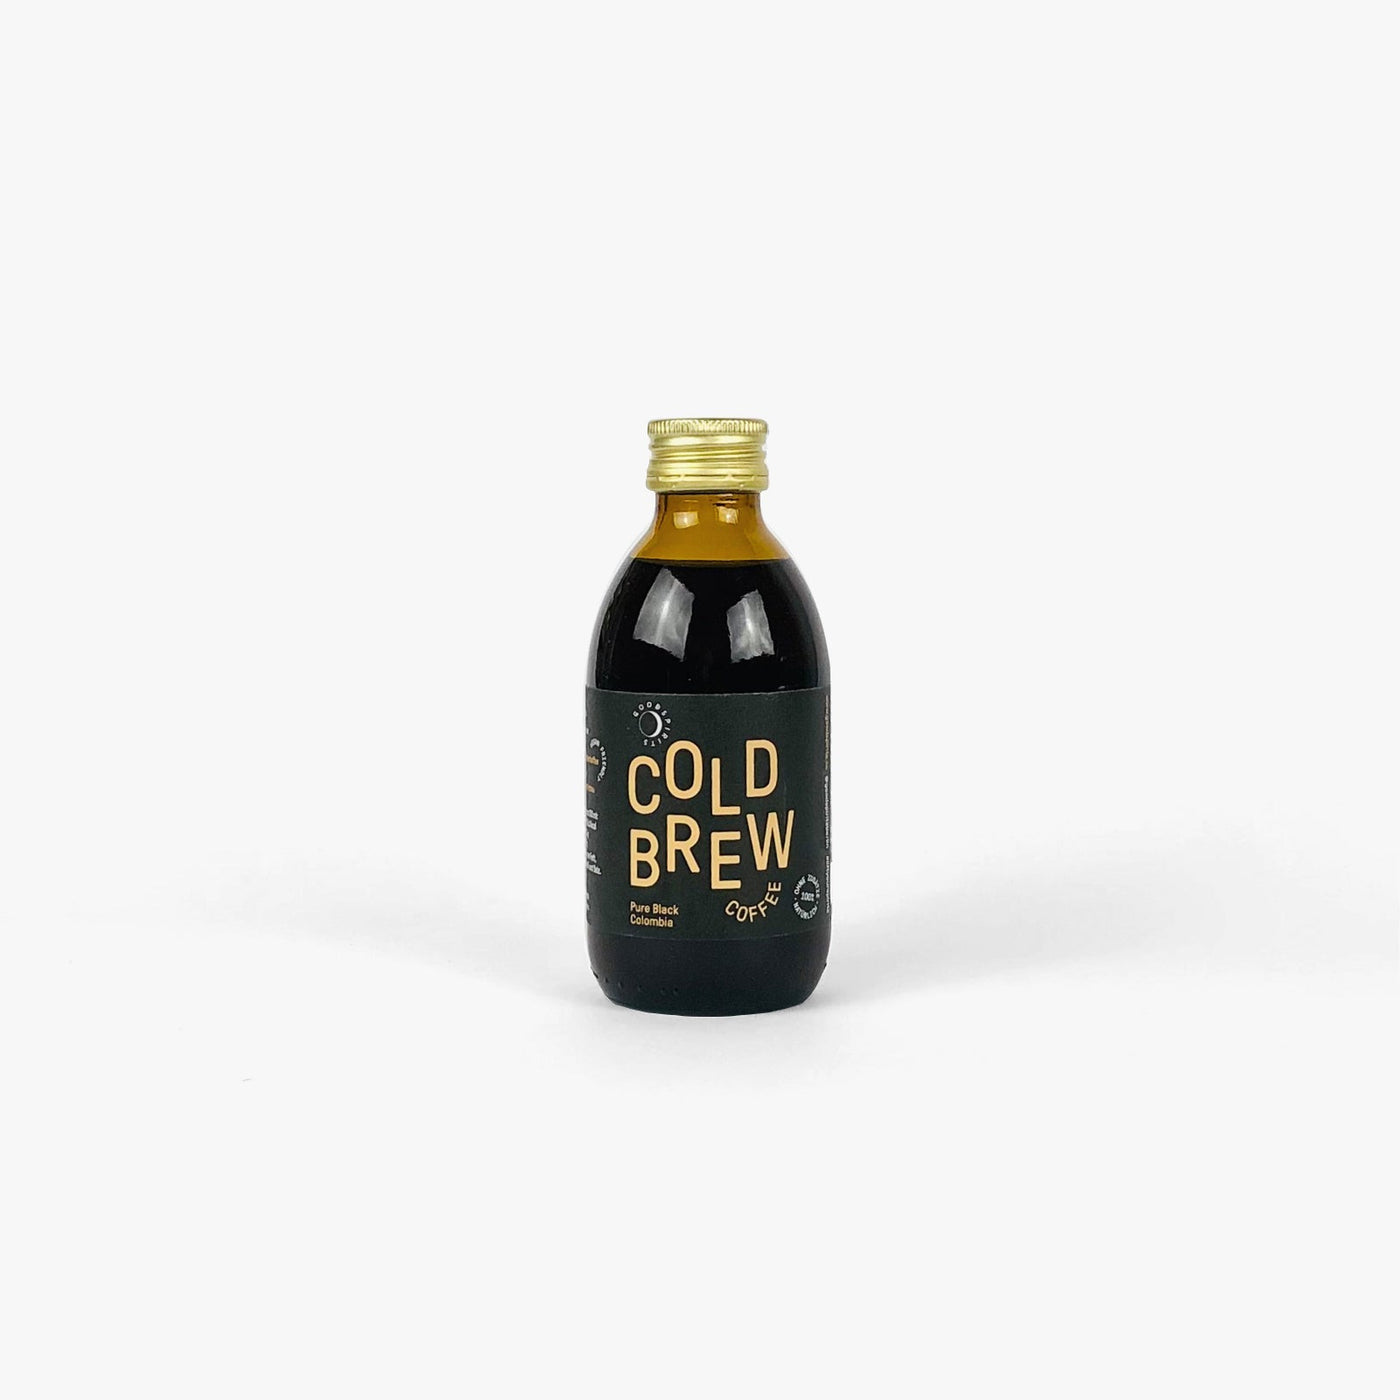 Good Spirits - Cold Brew Coffee "Pure Black Colombia"